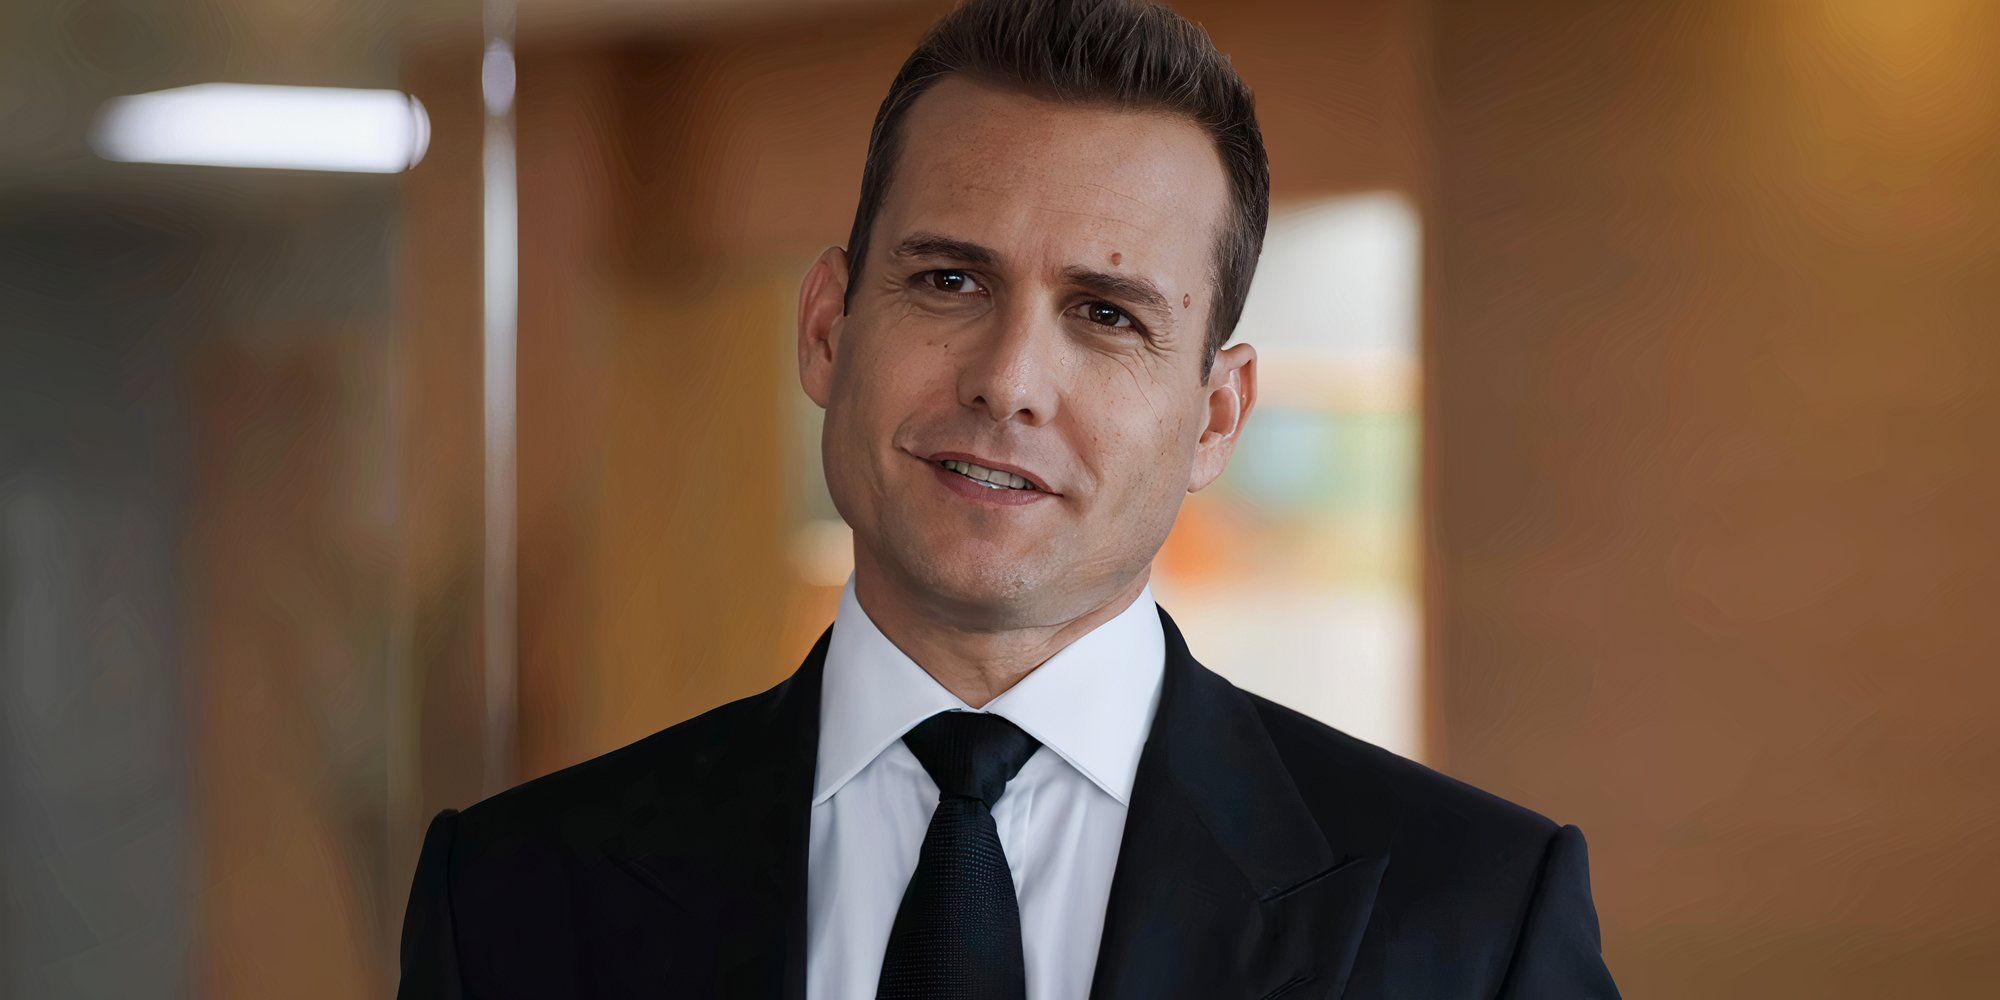 Harvey smiling in Suits' series finale